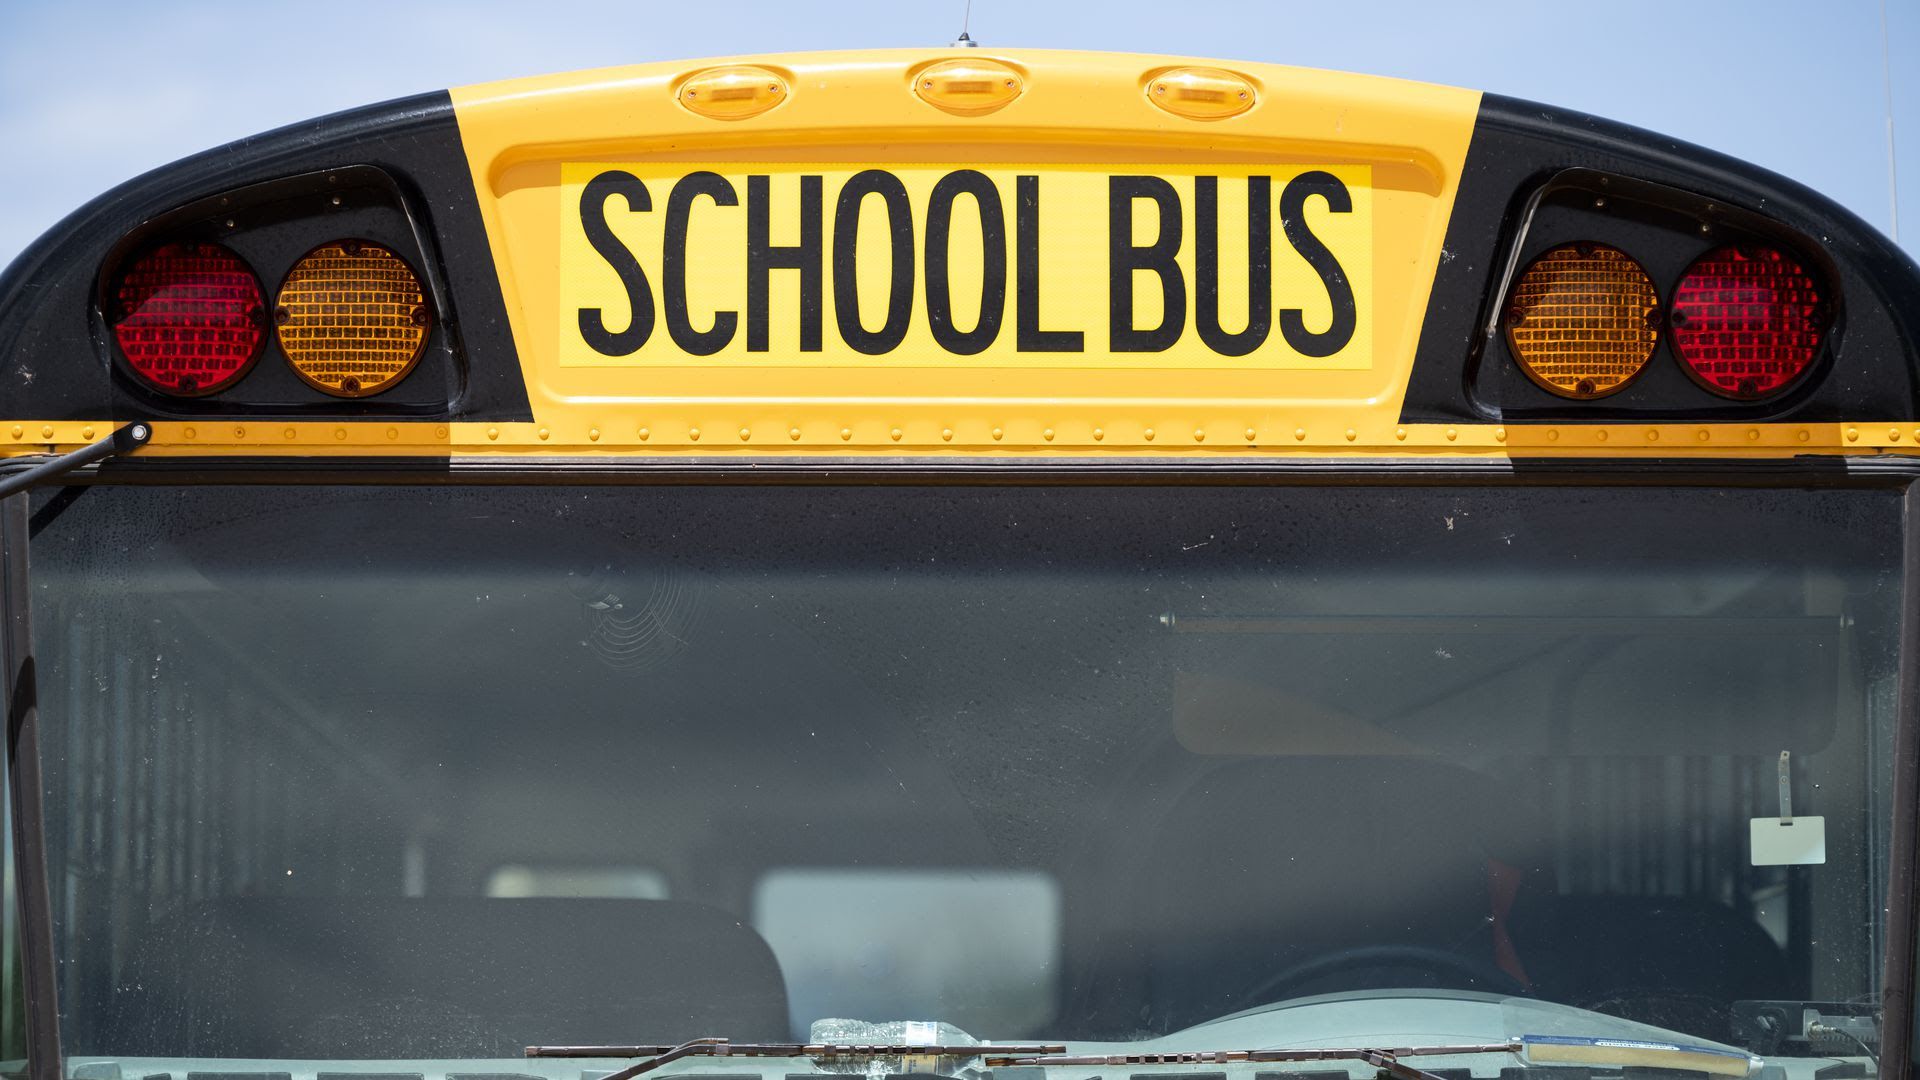 The front of a school bus